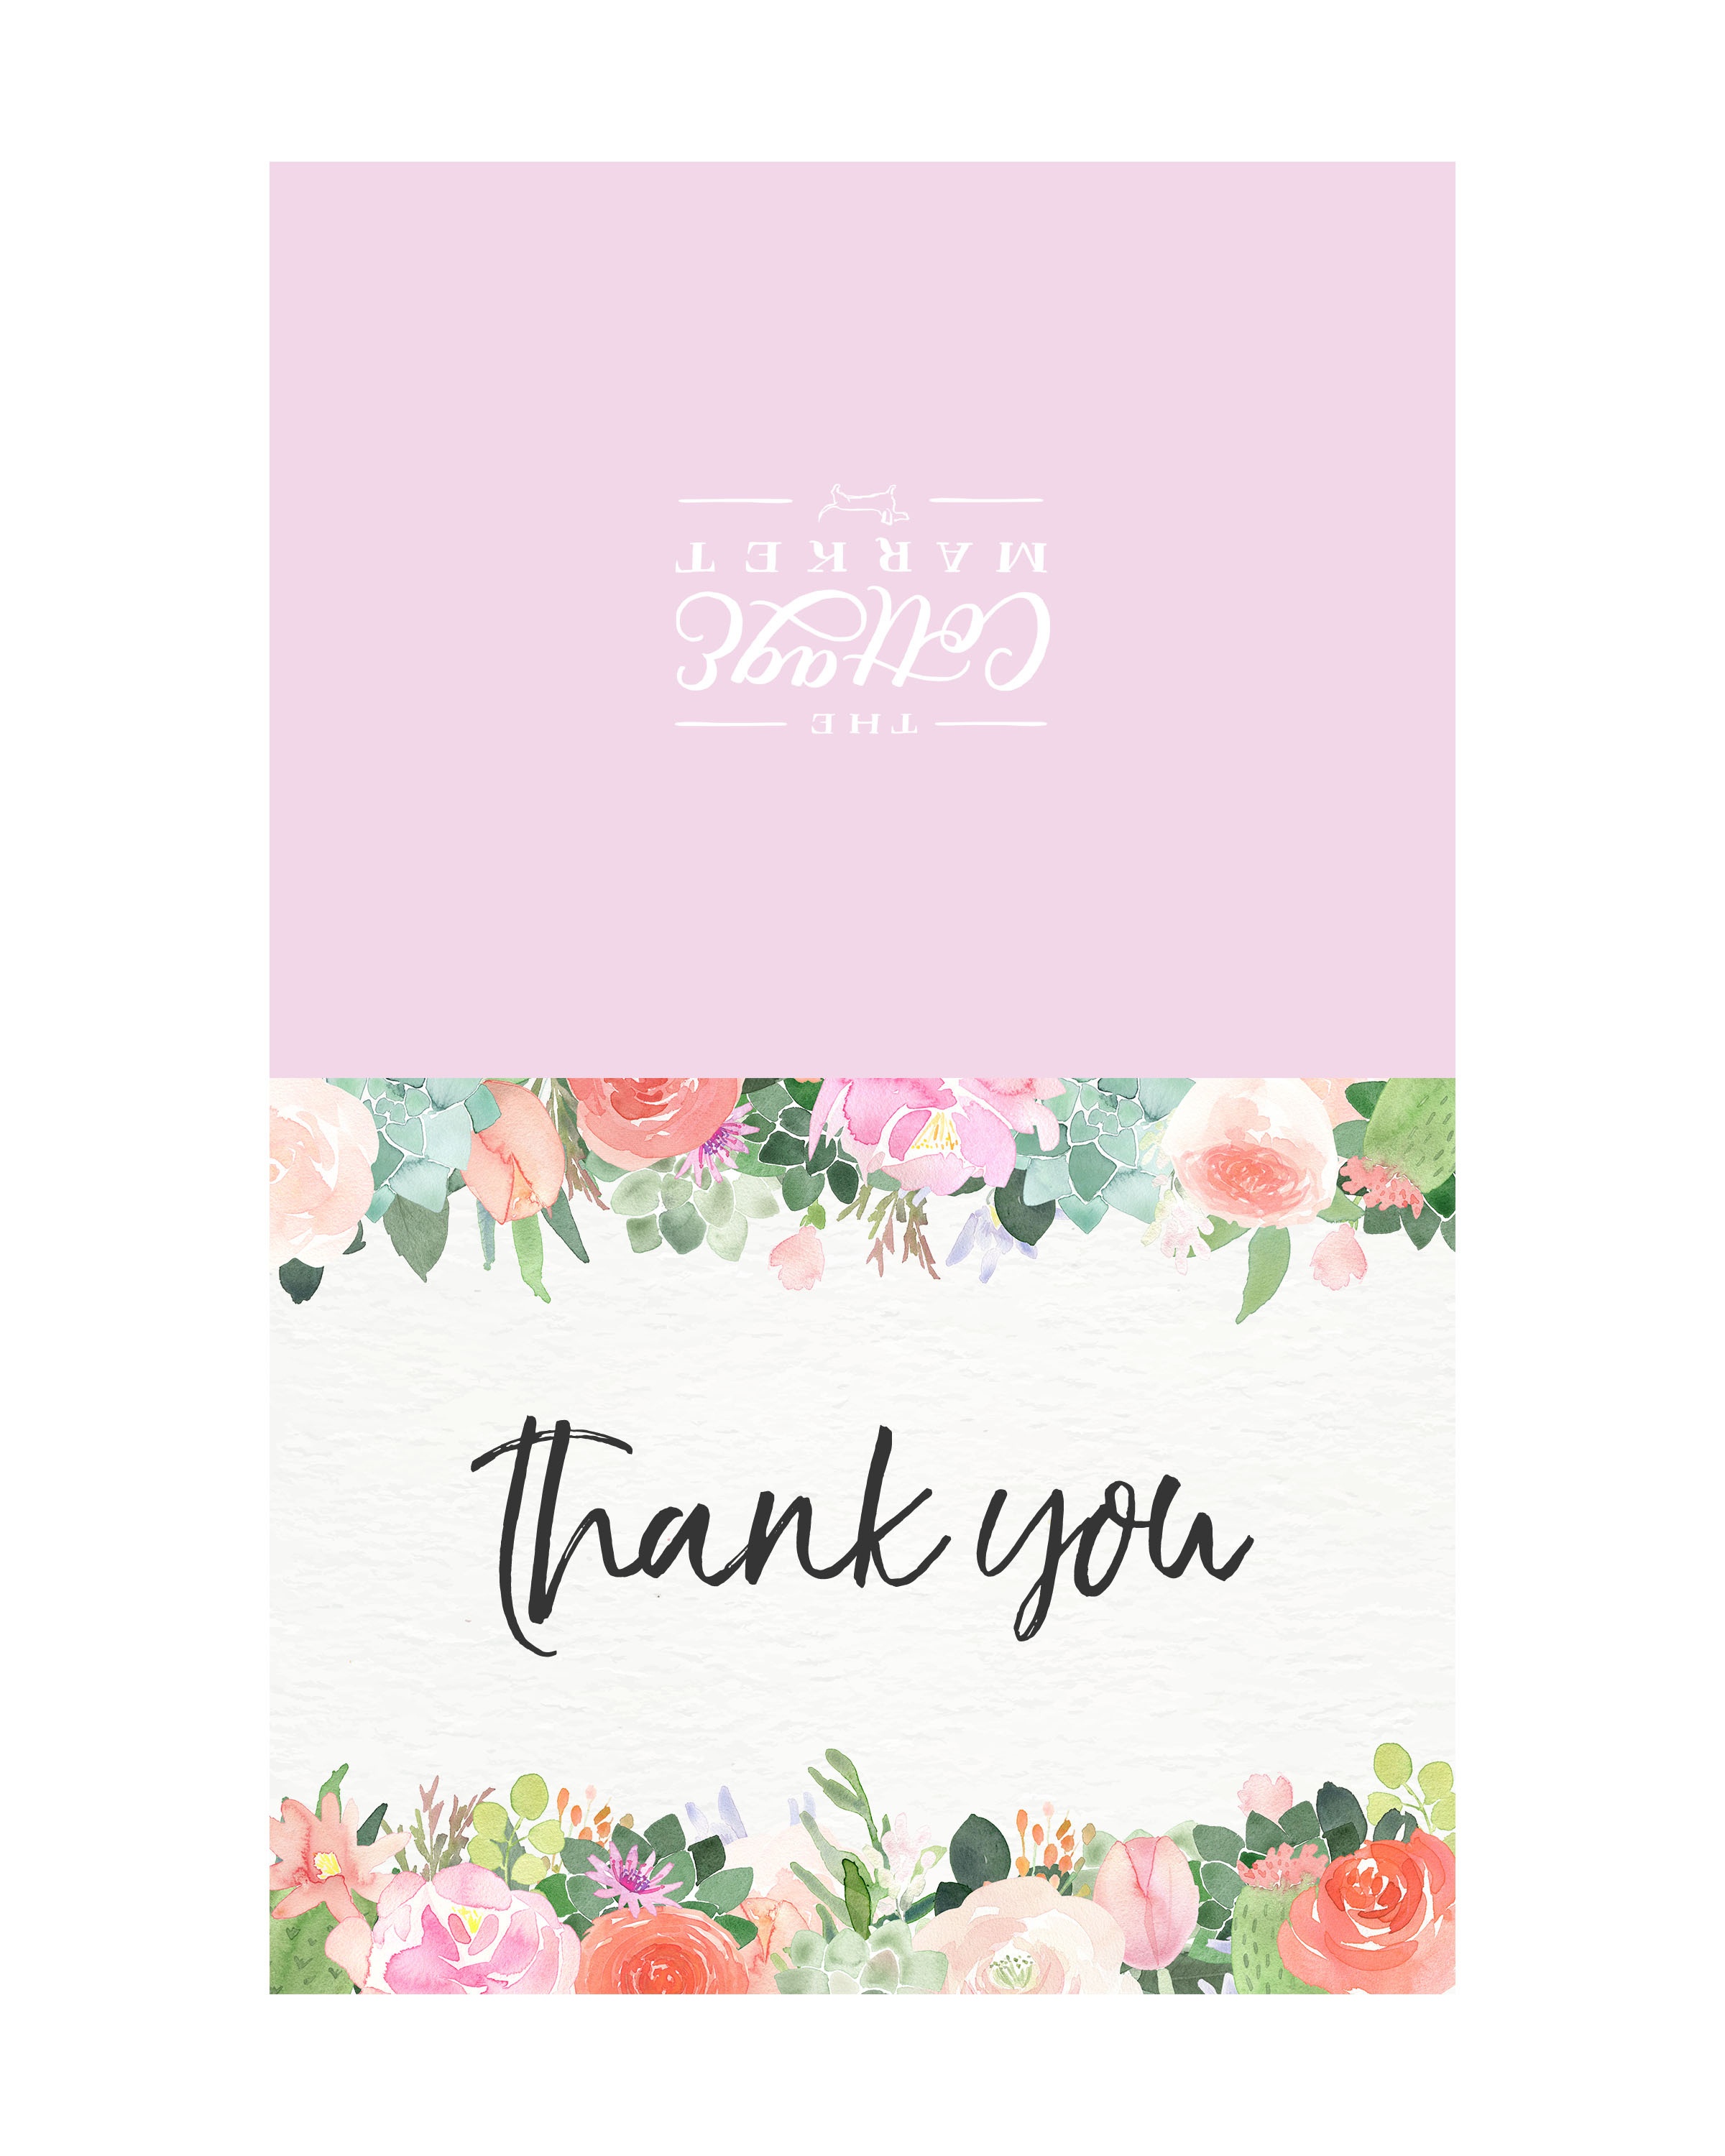 10 Free Printable Thank You Cards You Can&amp;#039;t Miss - The Cottage Market - Free Printable Thank You